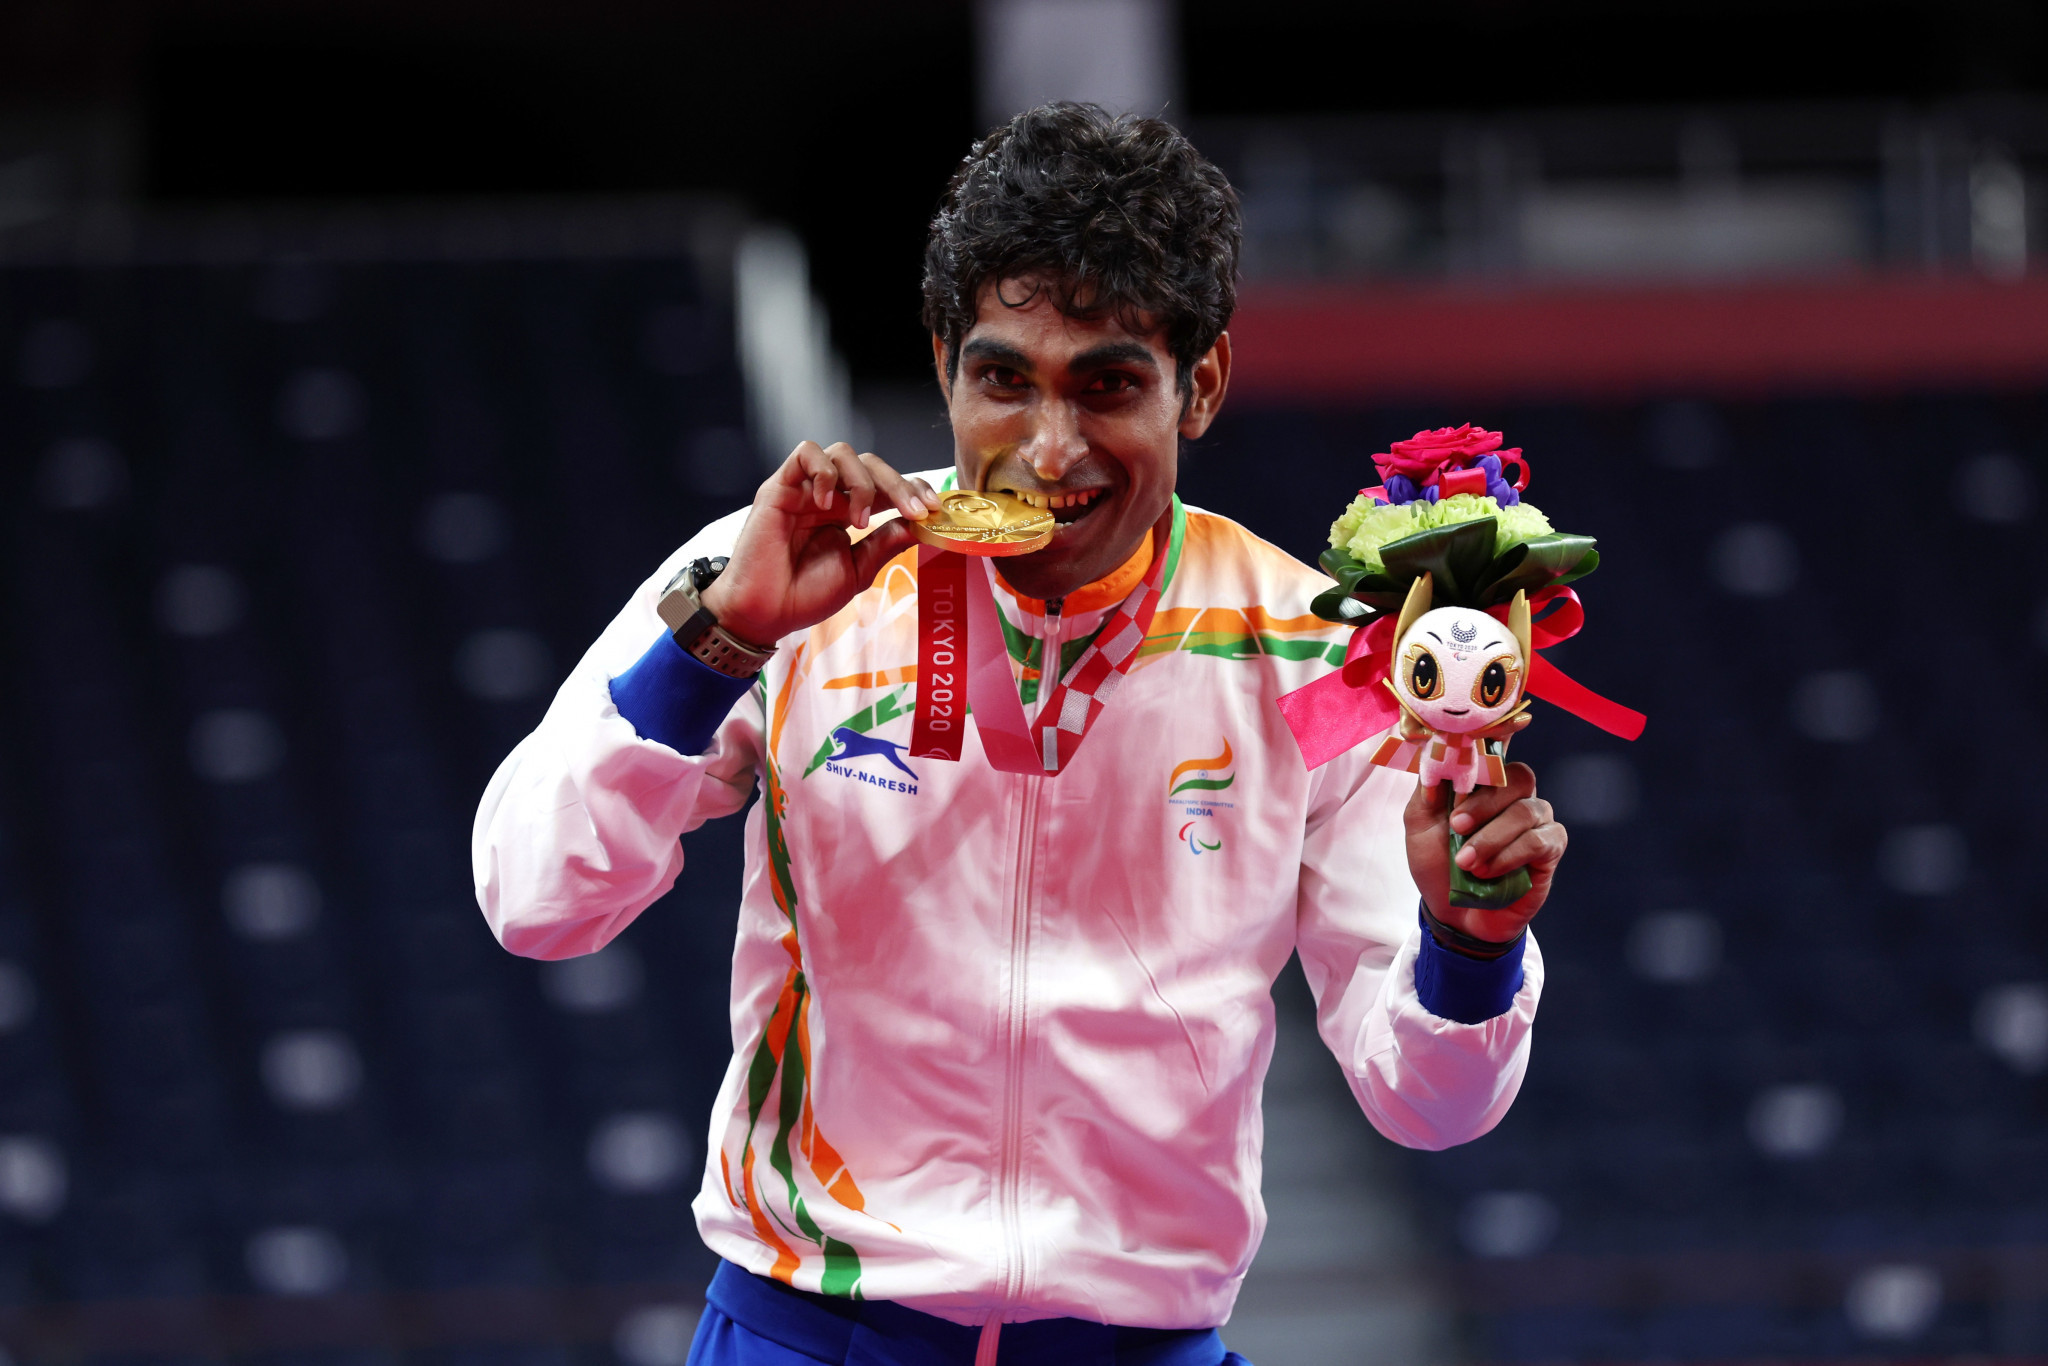 Pramod Bhagat claimed men’s singles SL3 gold at the Tokyo 2020 Paralympics ©Getty Images